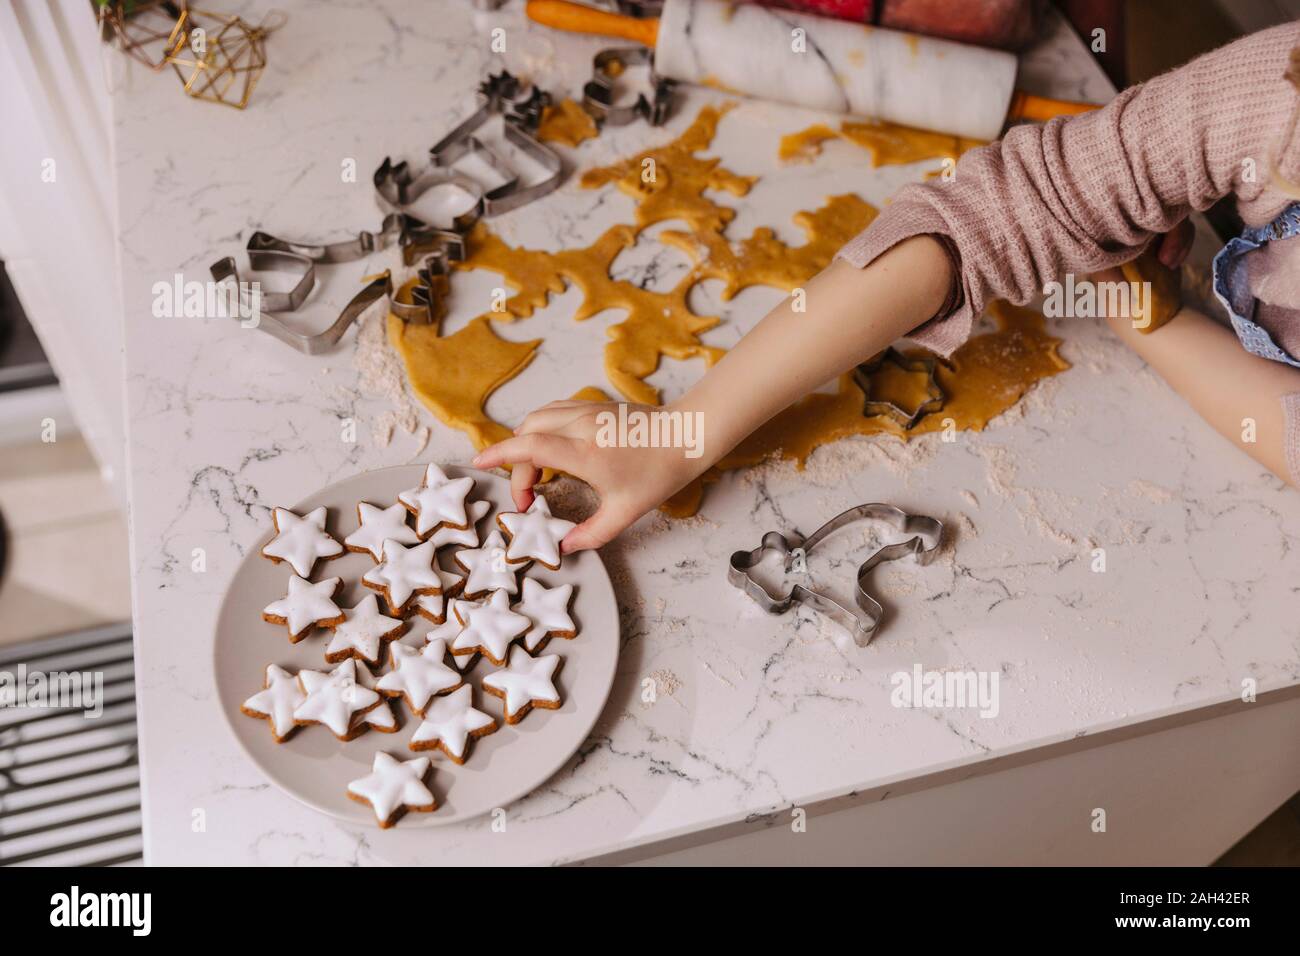 Close-up of girl taking Christmas cookie from plate on kitchencounter Stock Photo